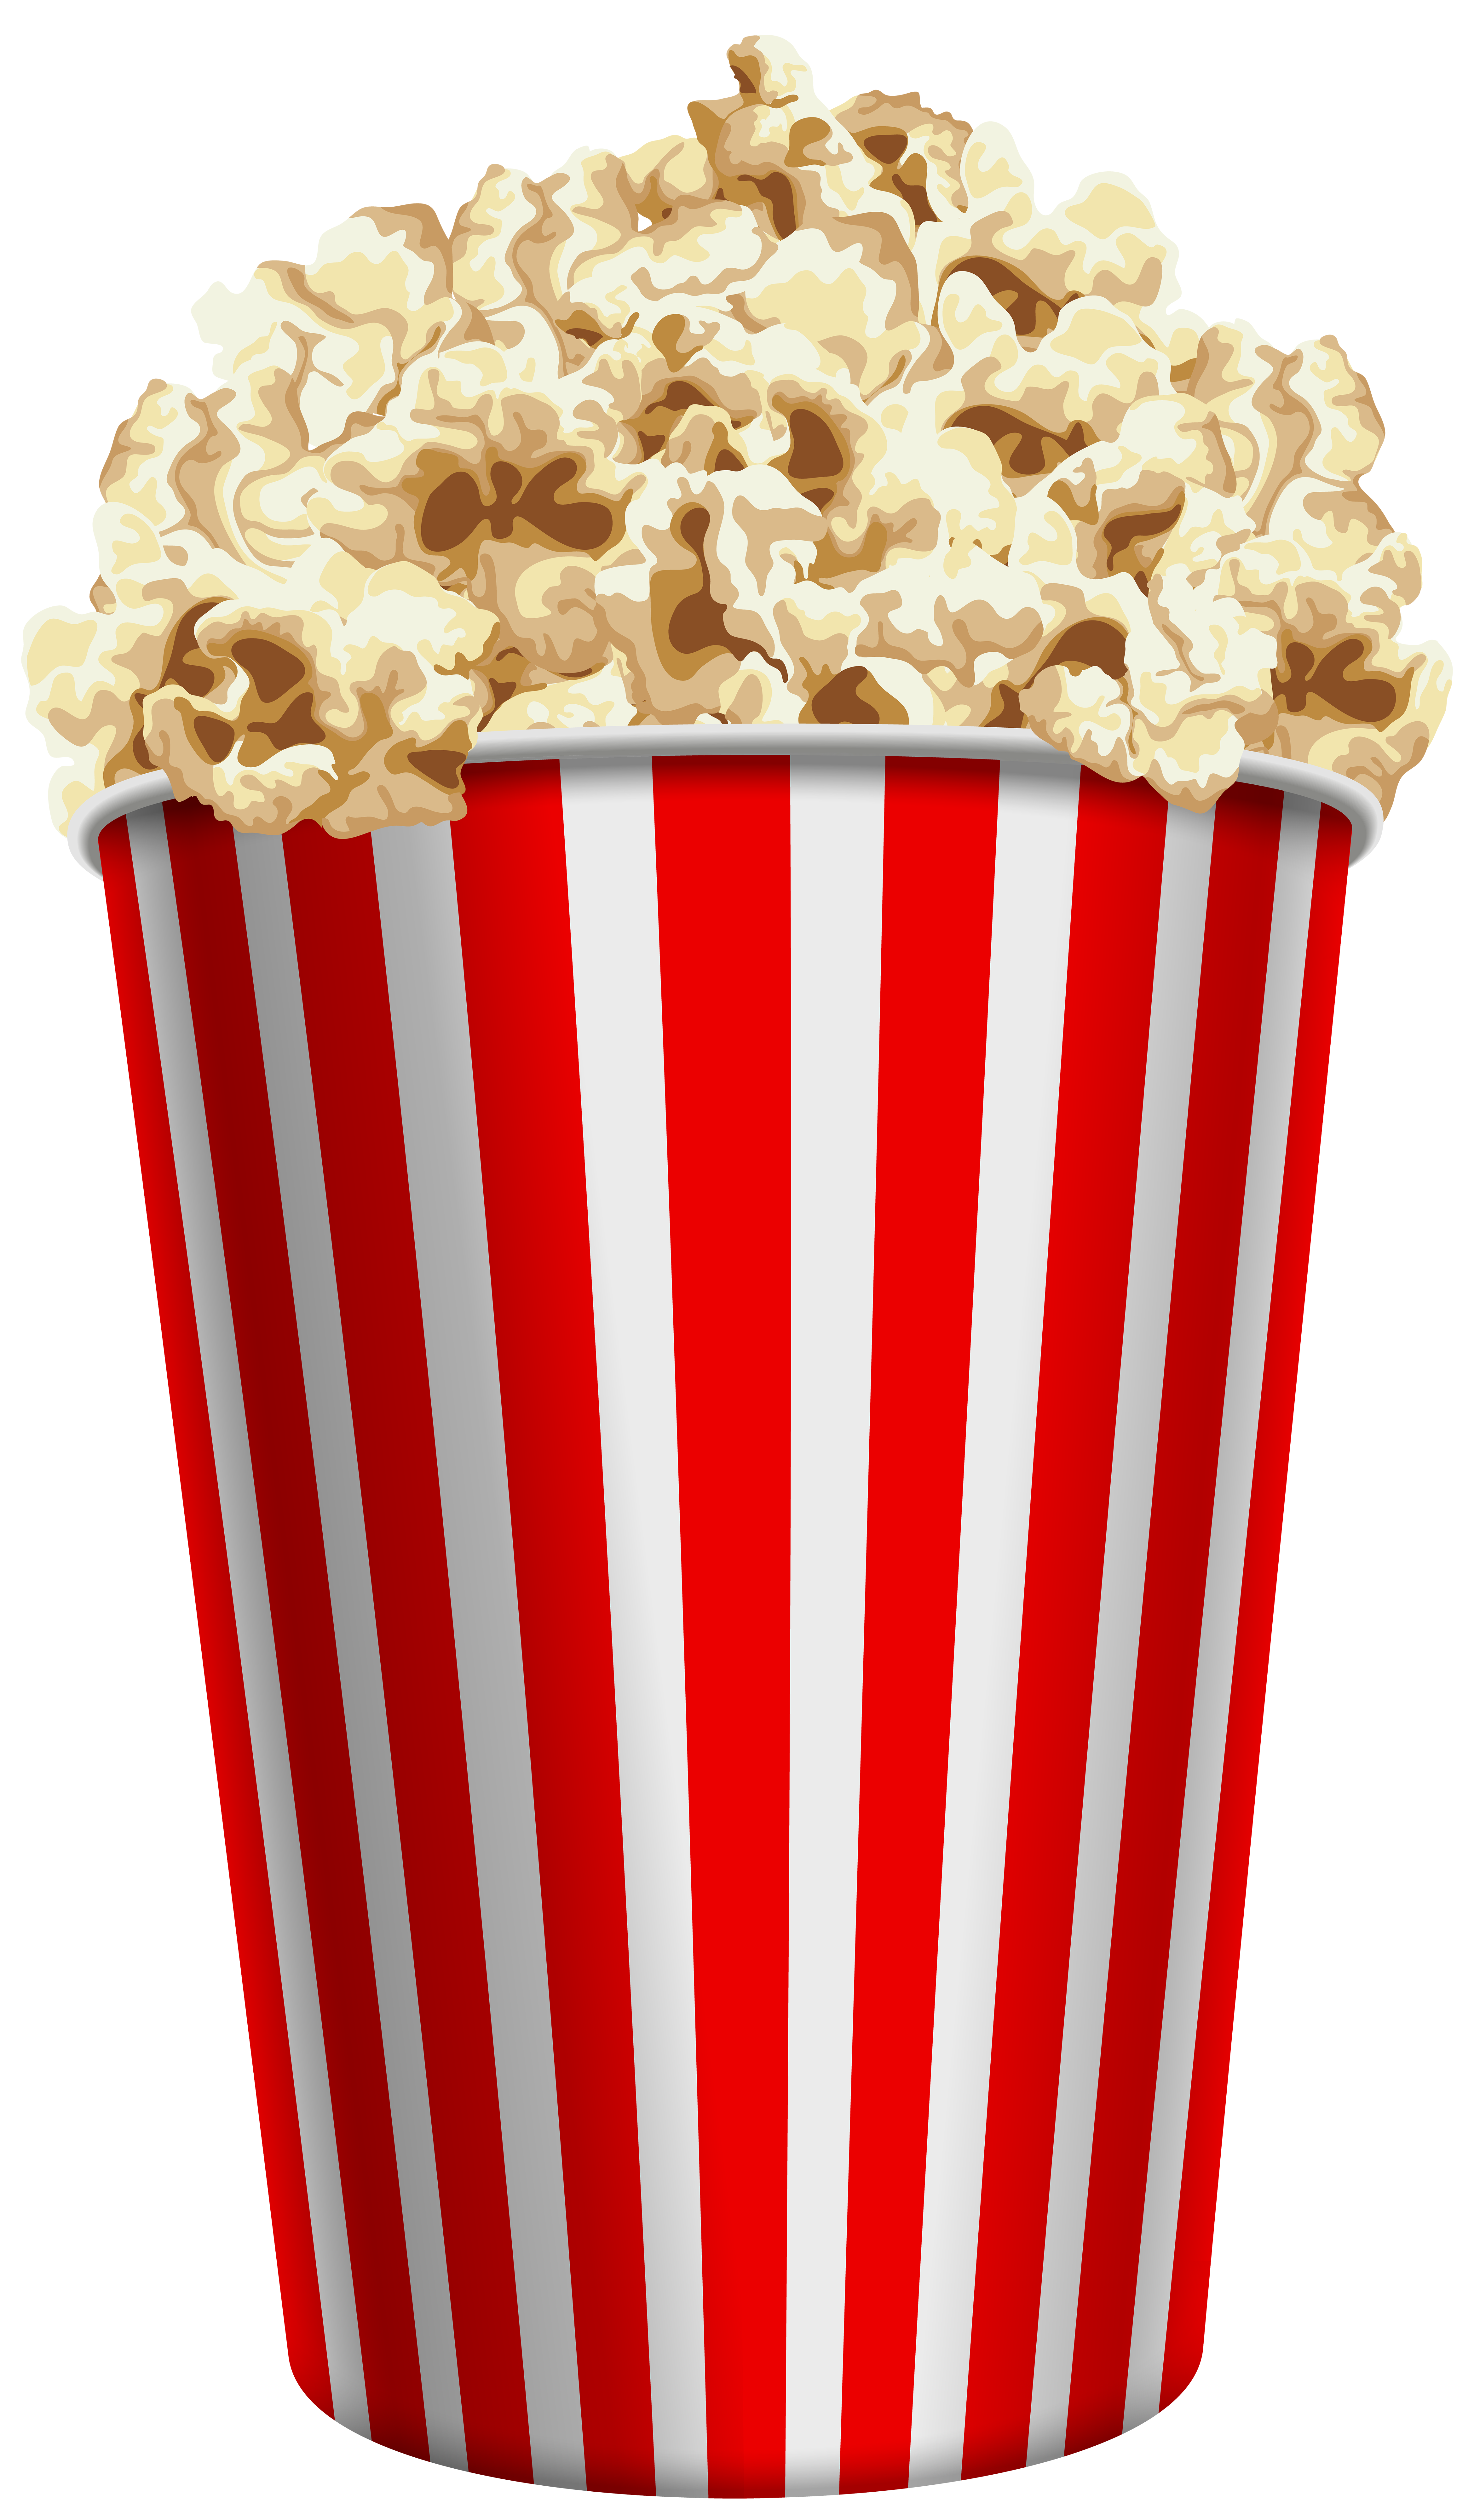 Popcorn PNG Clip Art | Gallery Yopriceville - High-Quality Images 